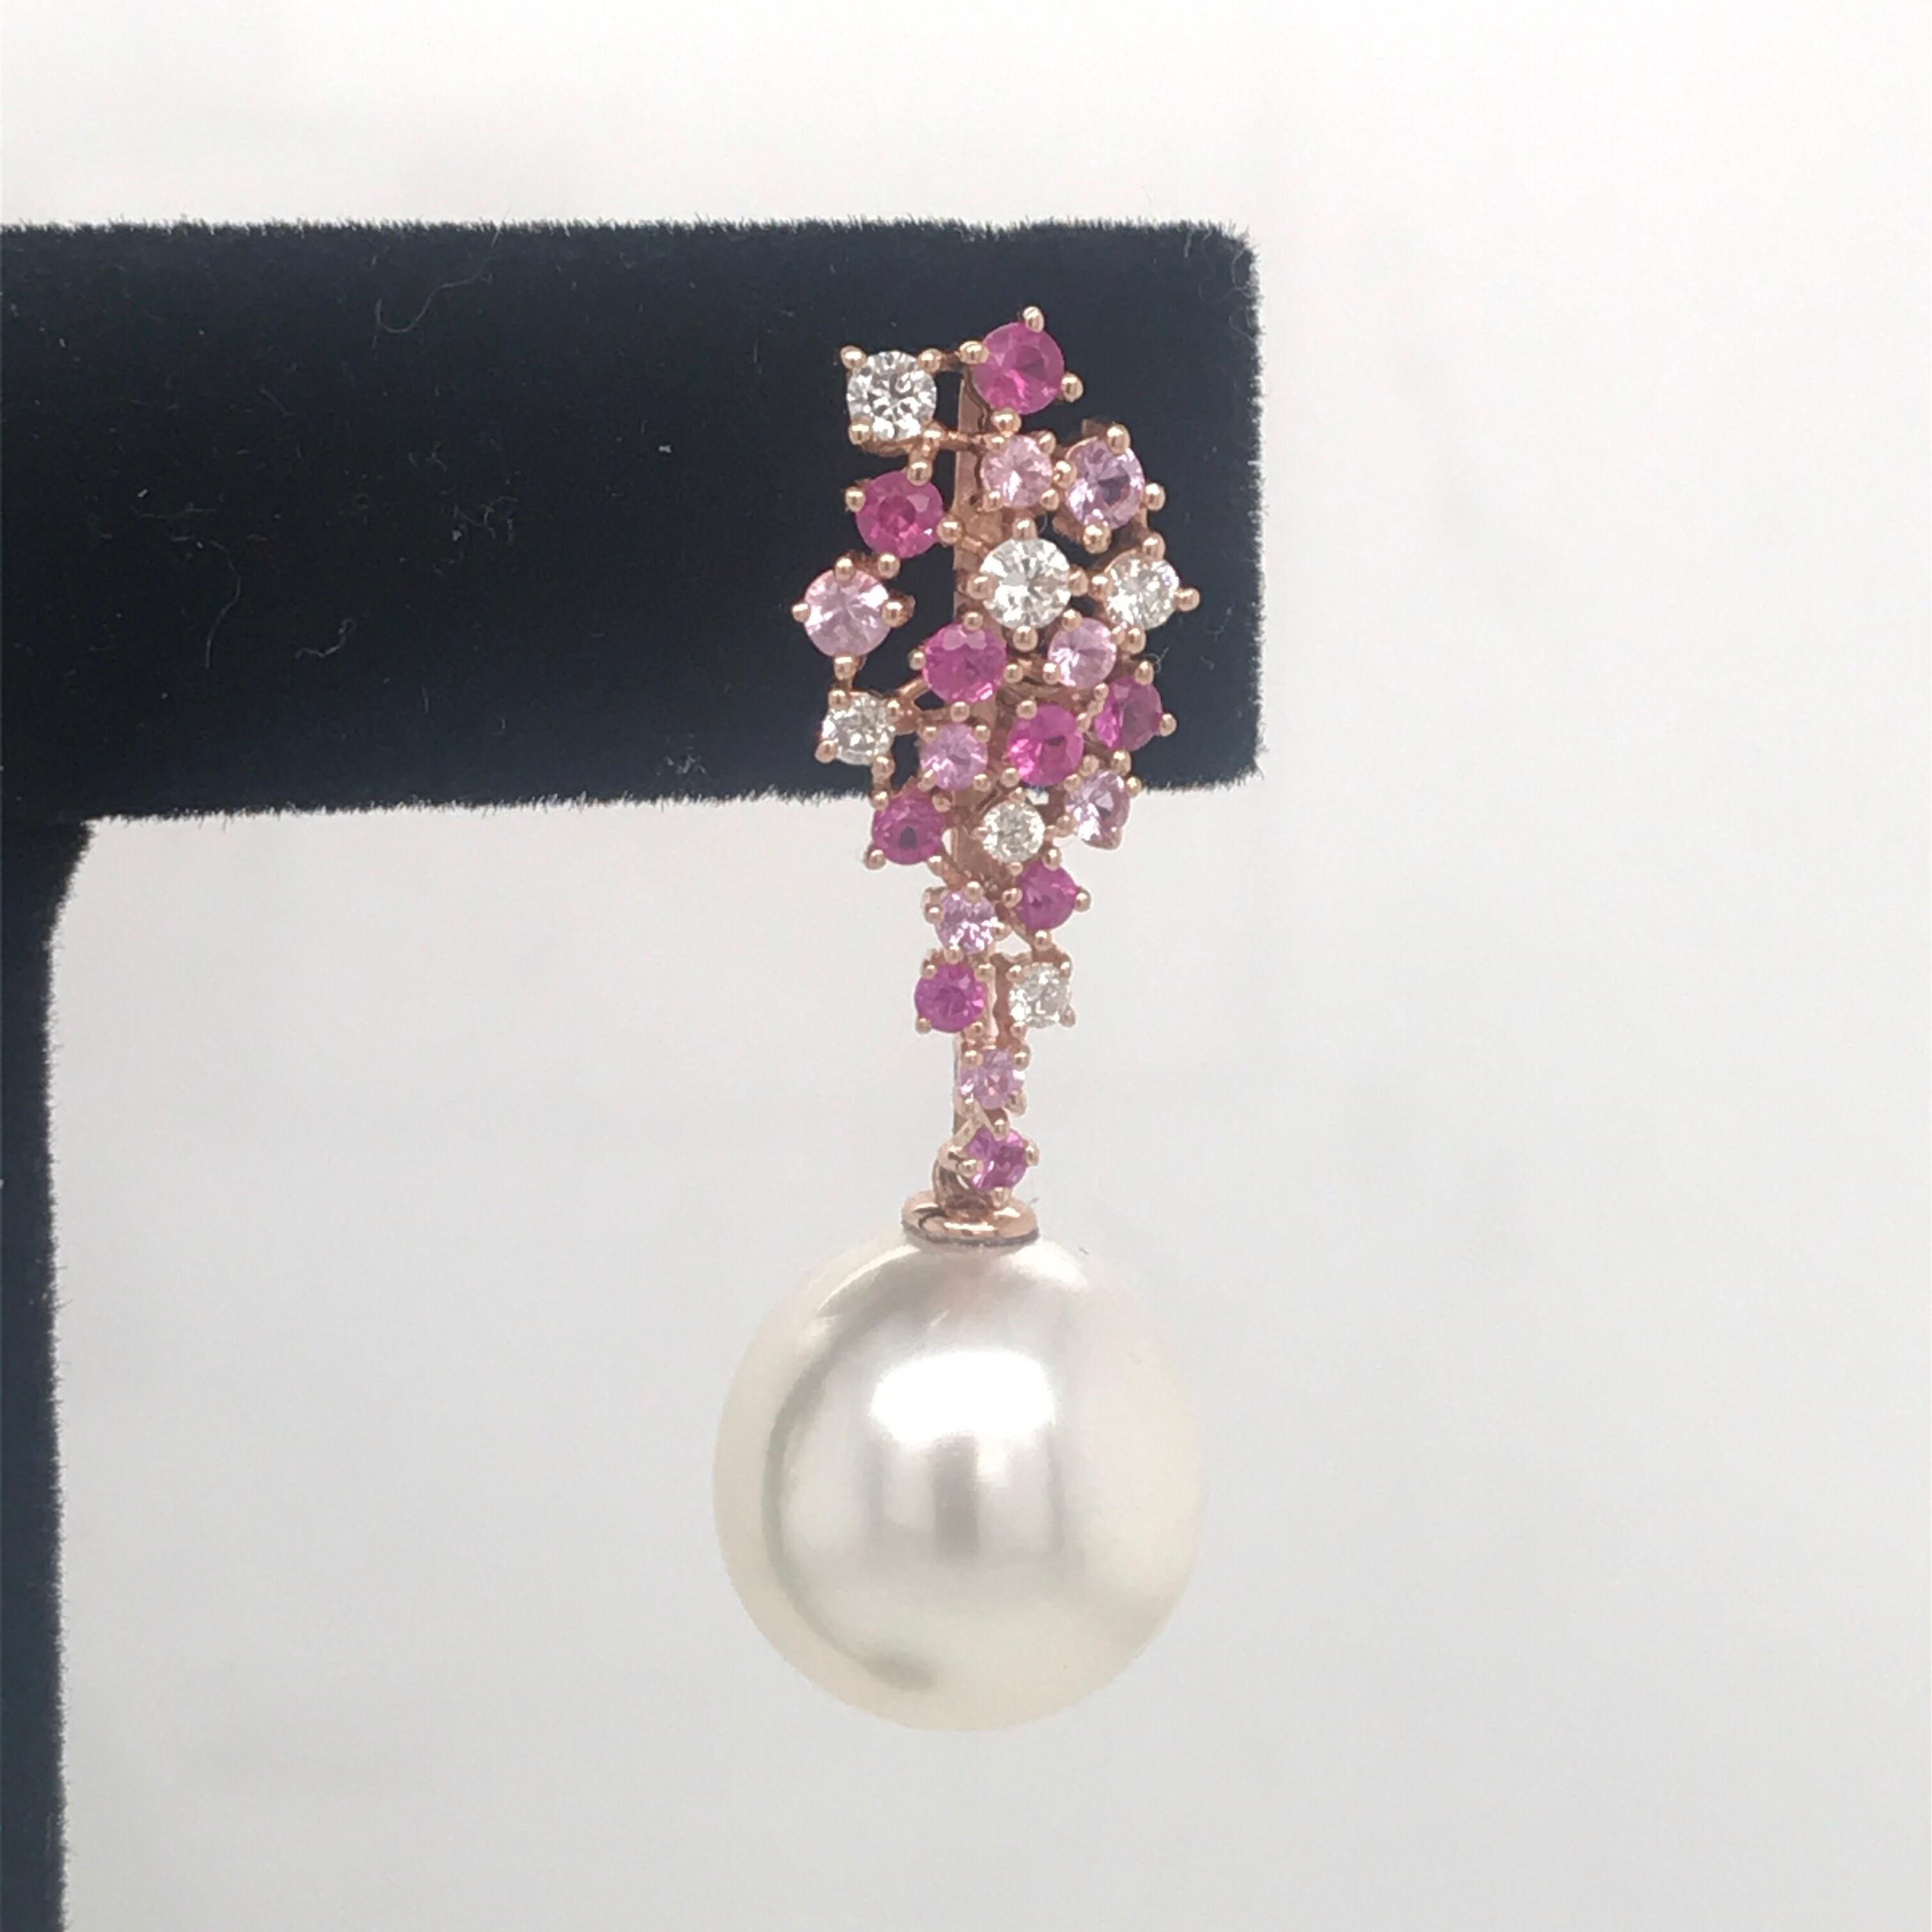 18K rose gold drop earrings featuring a cluster of 34 pink sapphires weighing 1.07 carats and 12 diamonds weighing 0.34 carats with two South Sea Pearls measuring 12-13 mm.